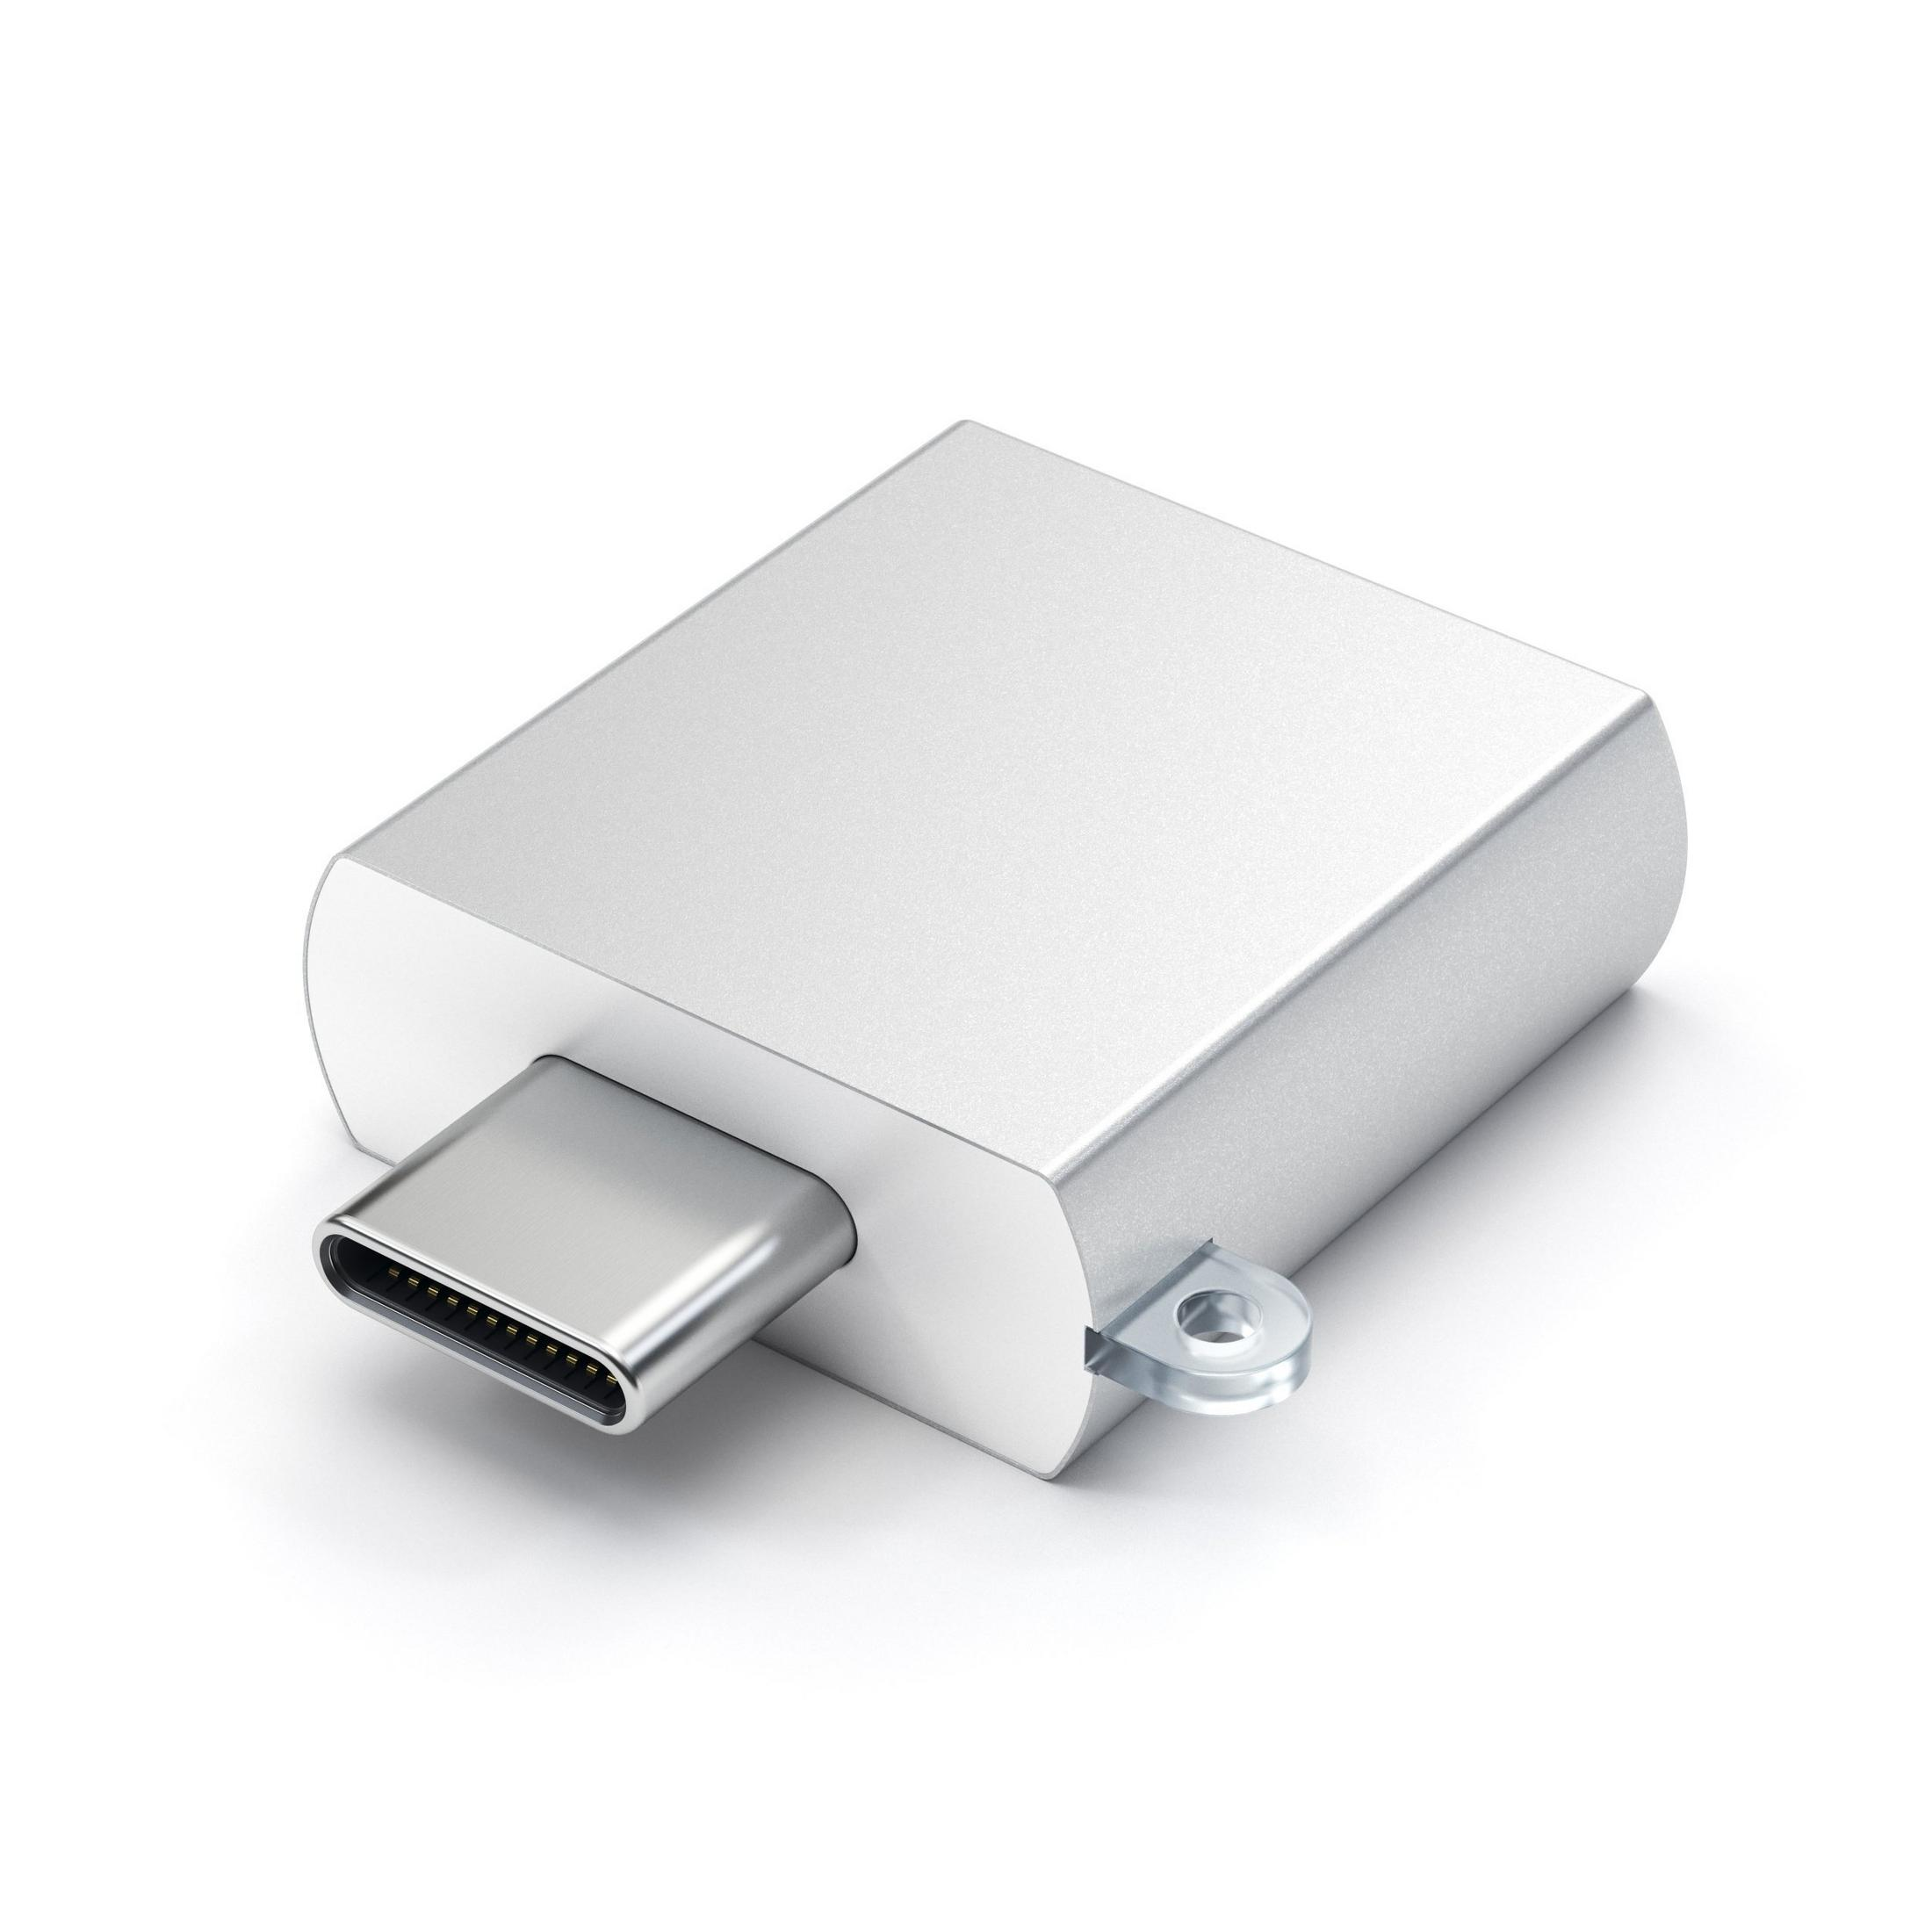 SATECHI 179965 TYPE-C USB ADAPTER Adapter, Silber SILBER